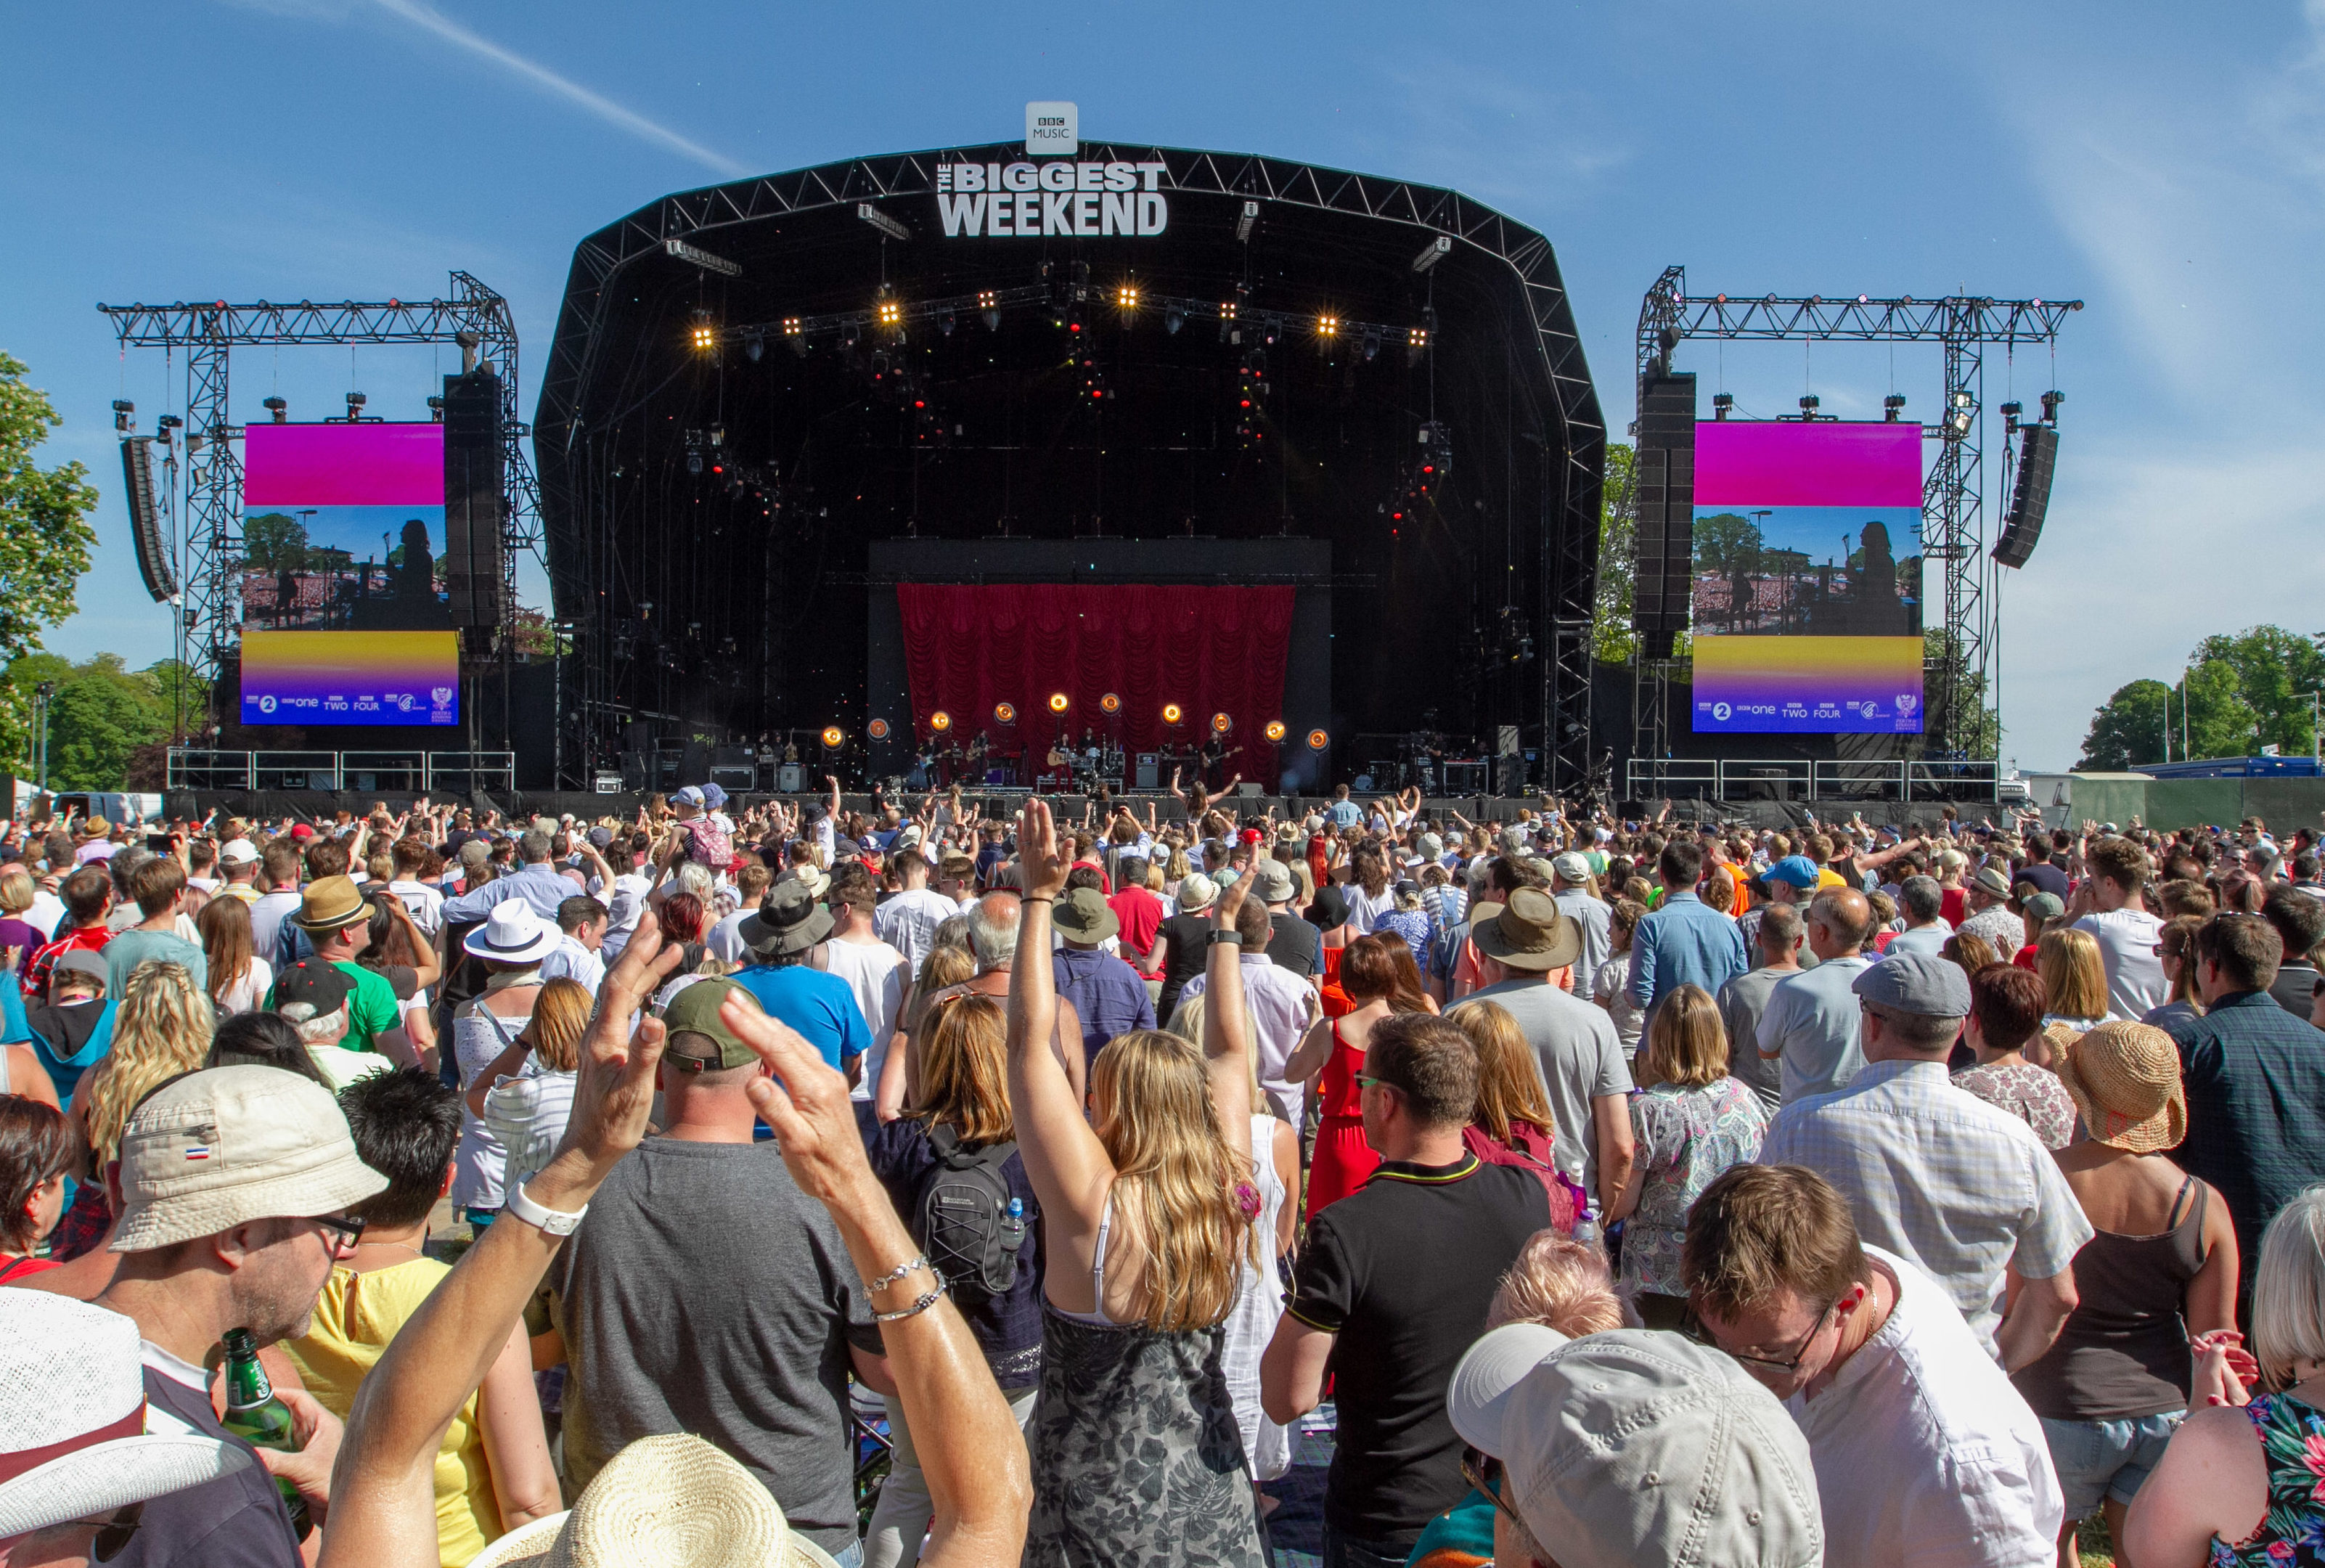 BBC's Biggest Weekend at Scone Palace in May